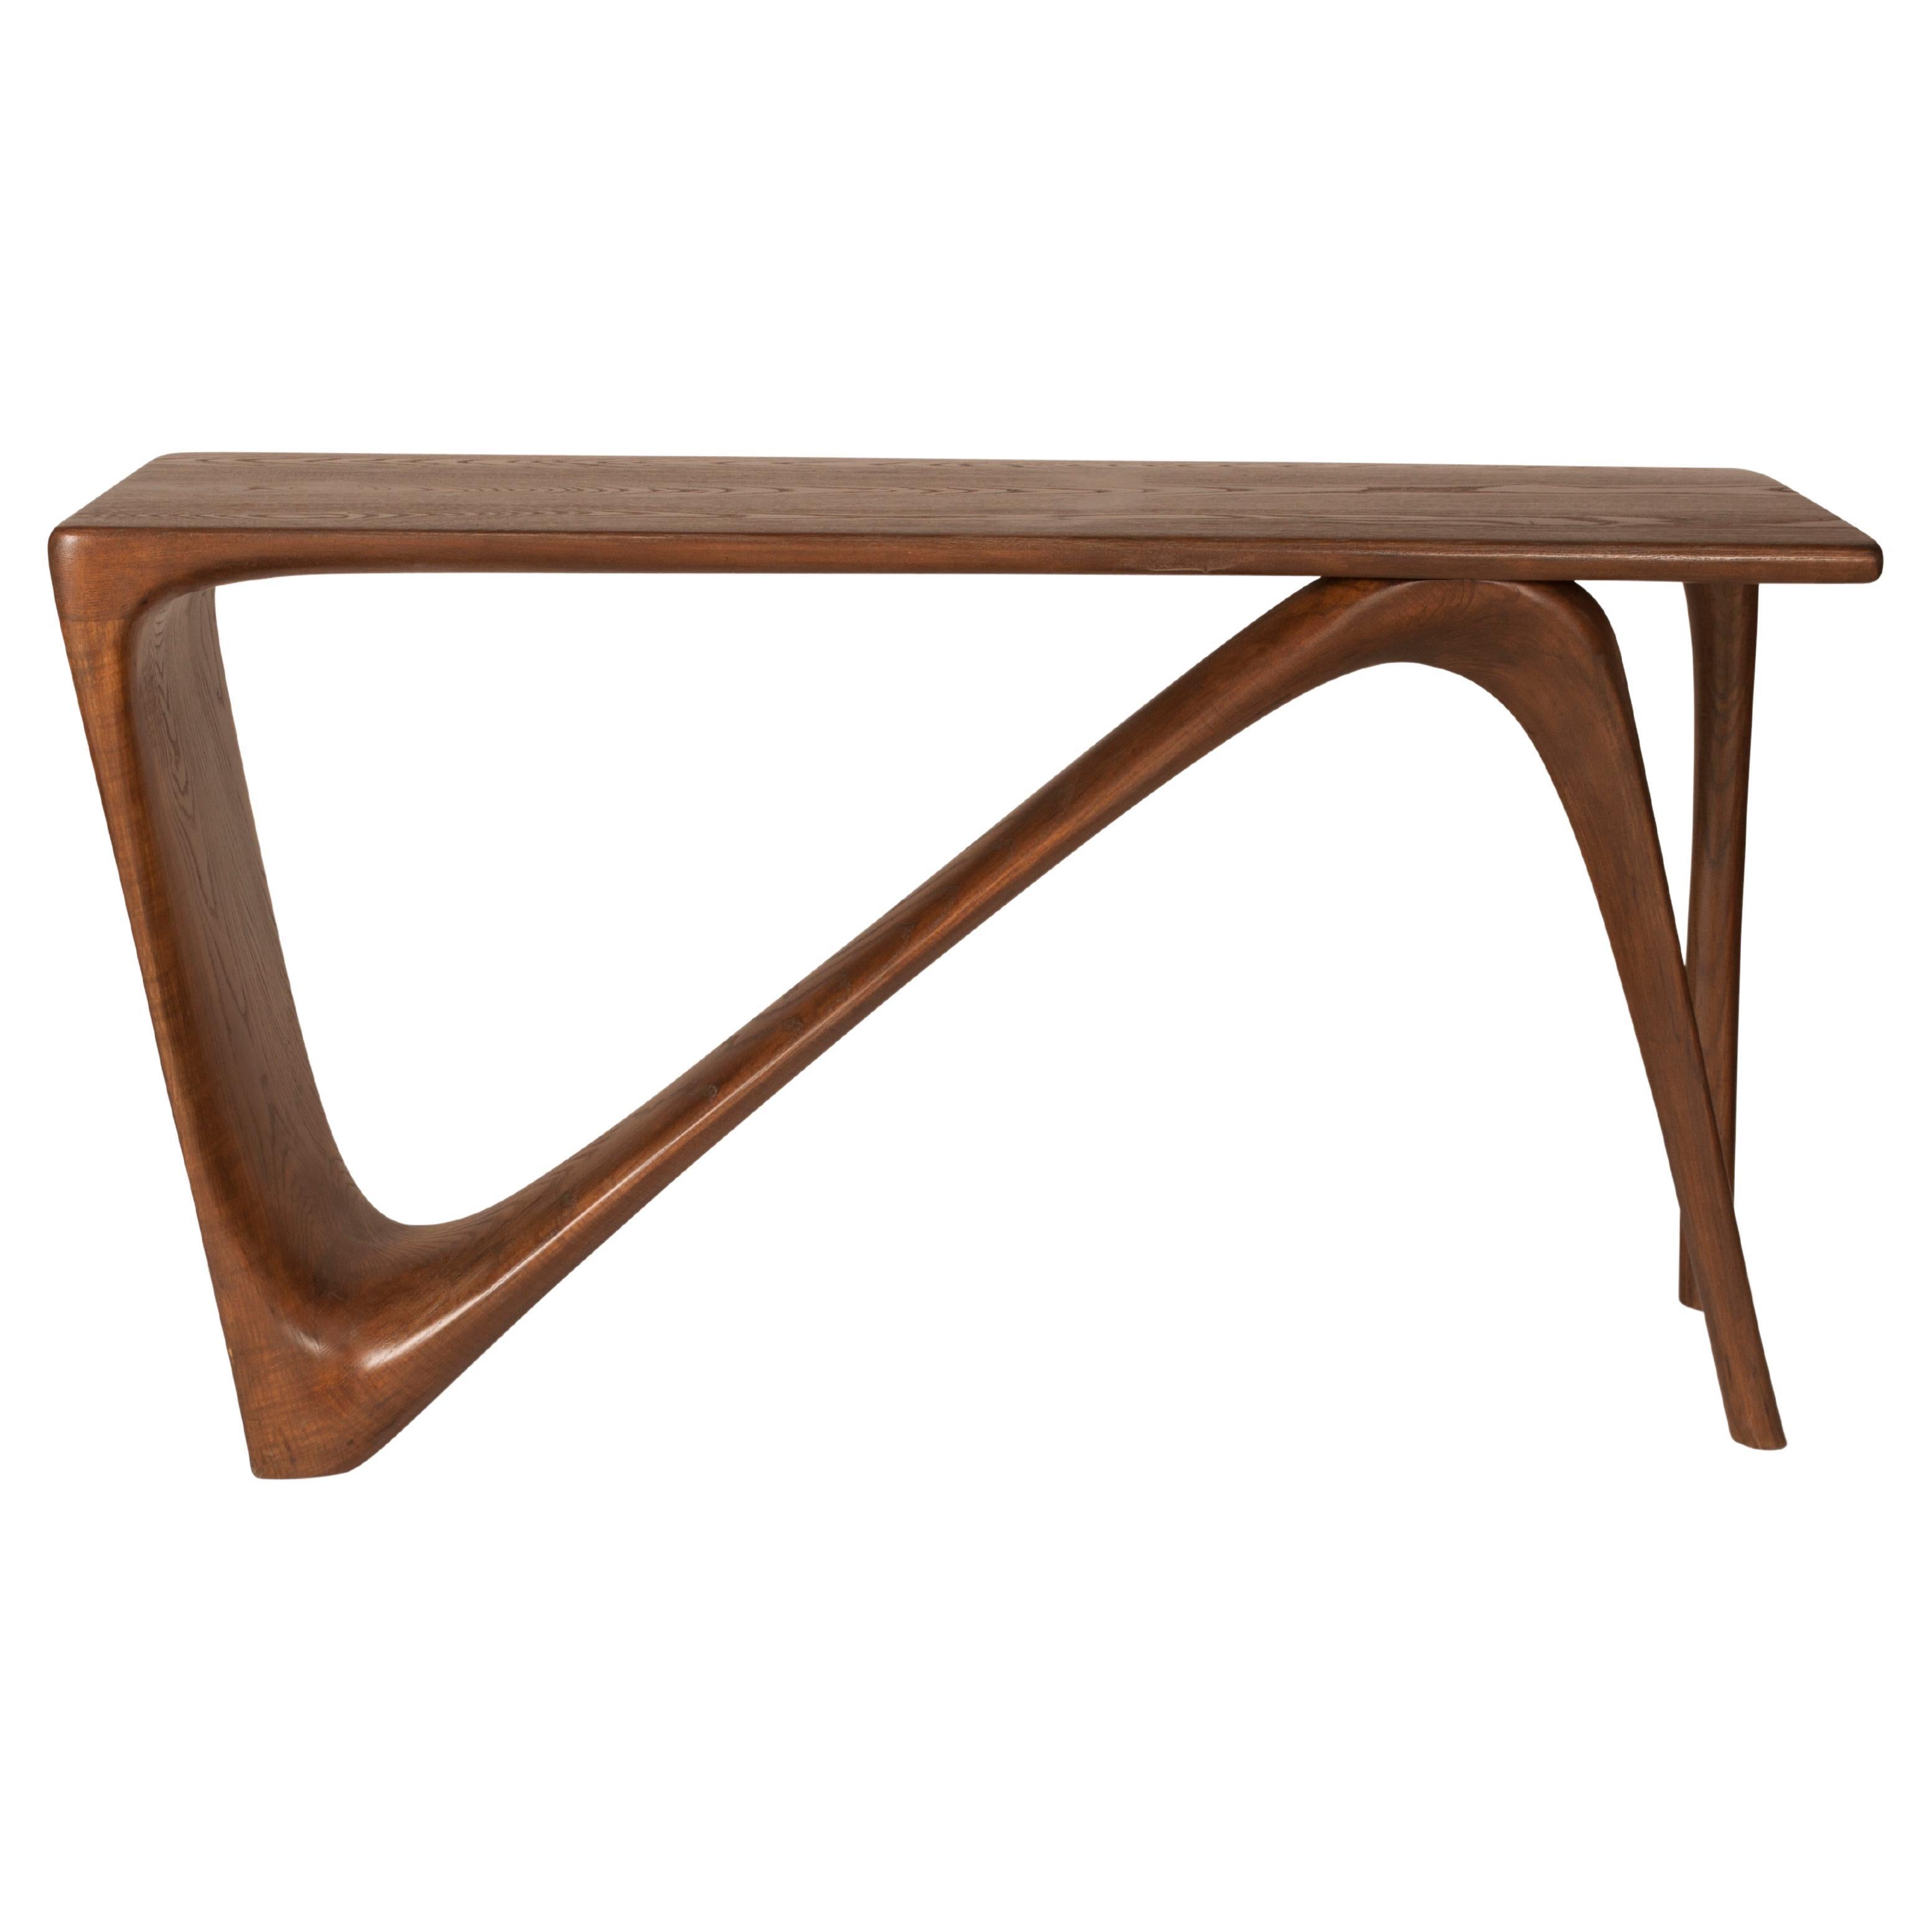 Amorph Astra modern Desk in Graphite Walnut Stain on Ash wood  For Sale